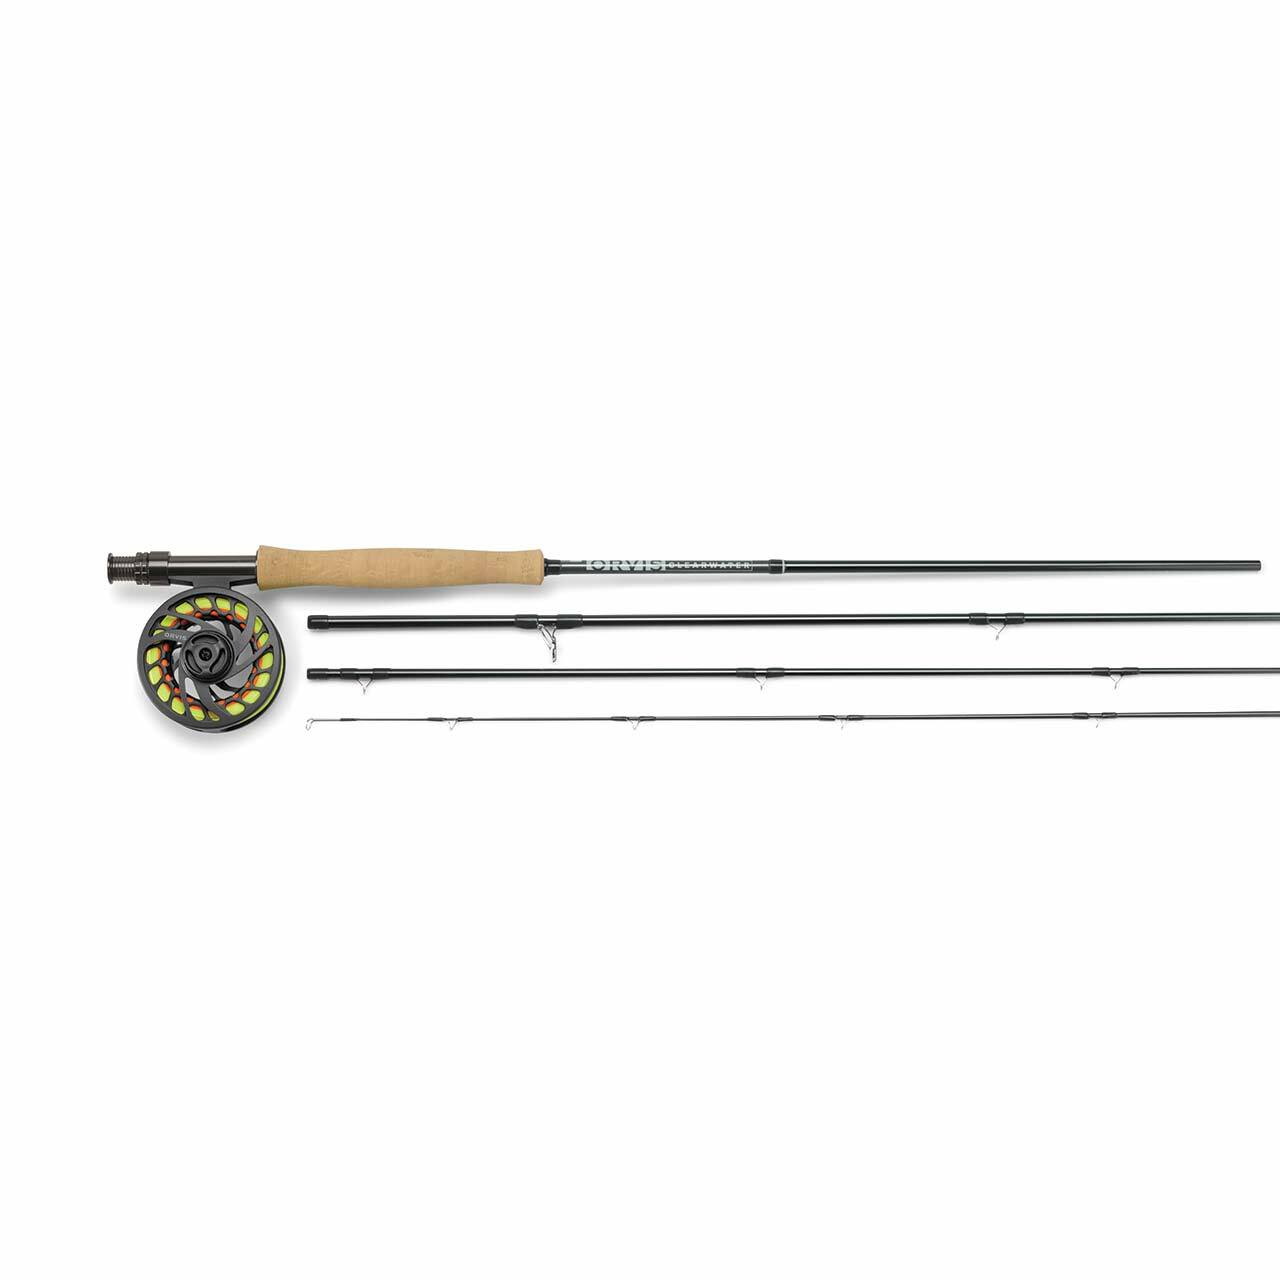 Orvis Clearwater 9' 5wt Fly Rod Outfit